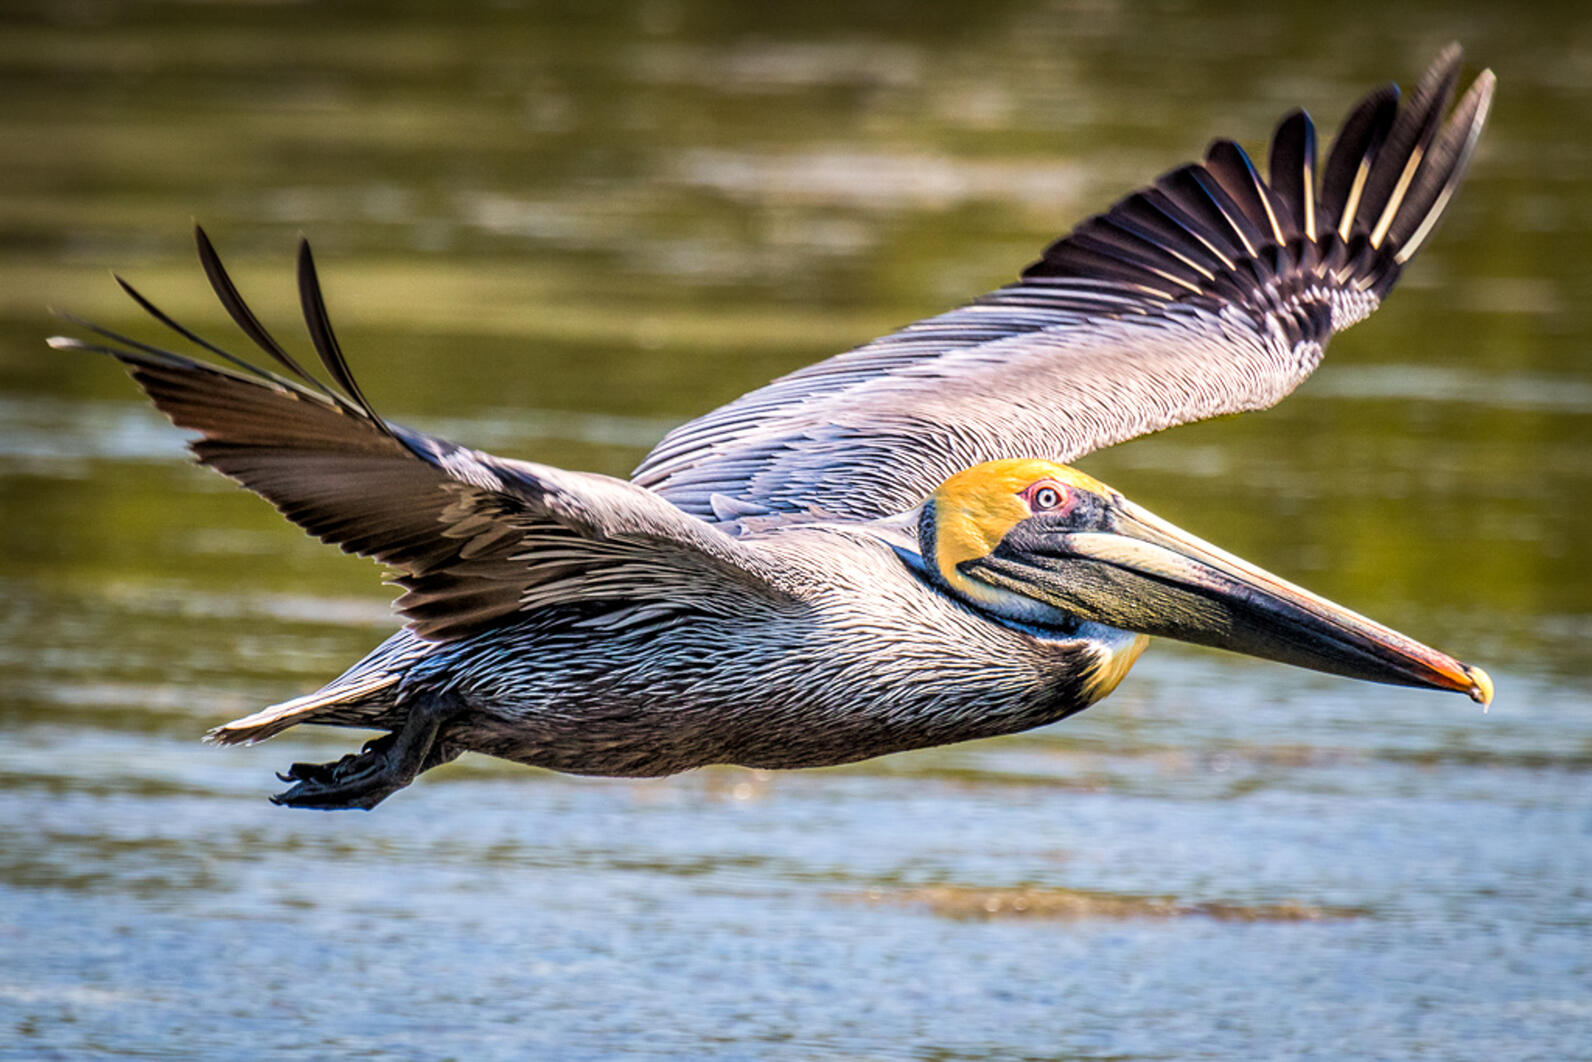 A brown pelican flies close to a body of water. It's large wings are spread wide as it's feathers blow in the wind.